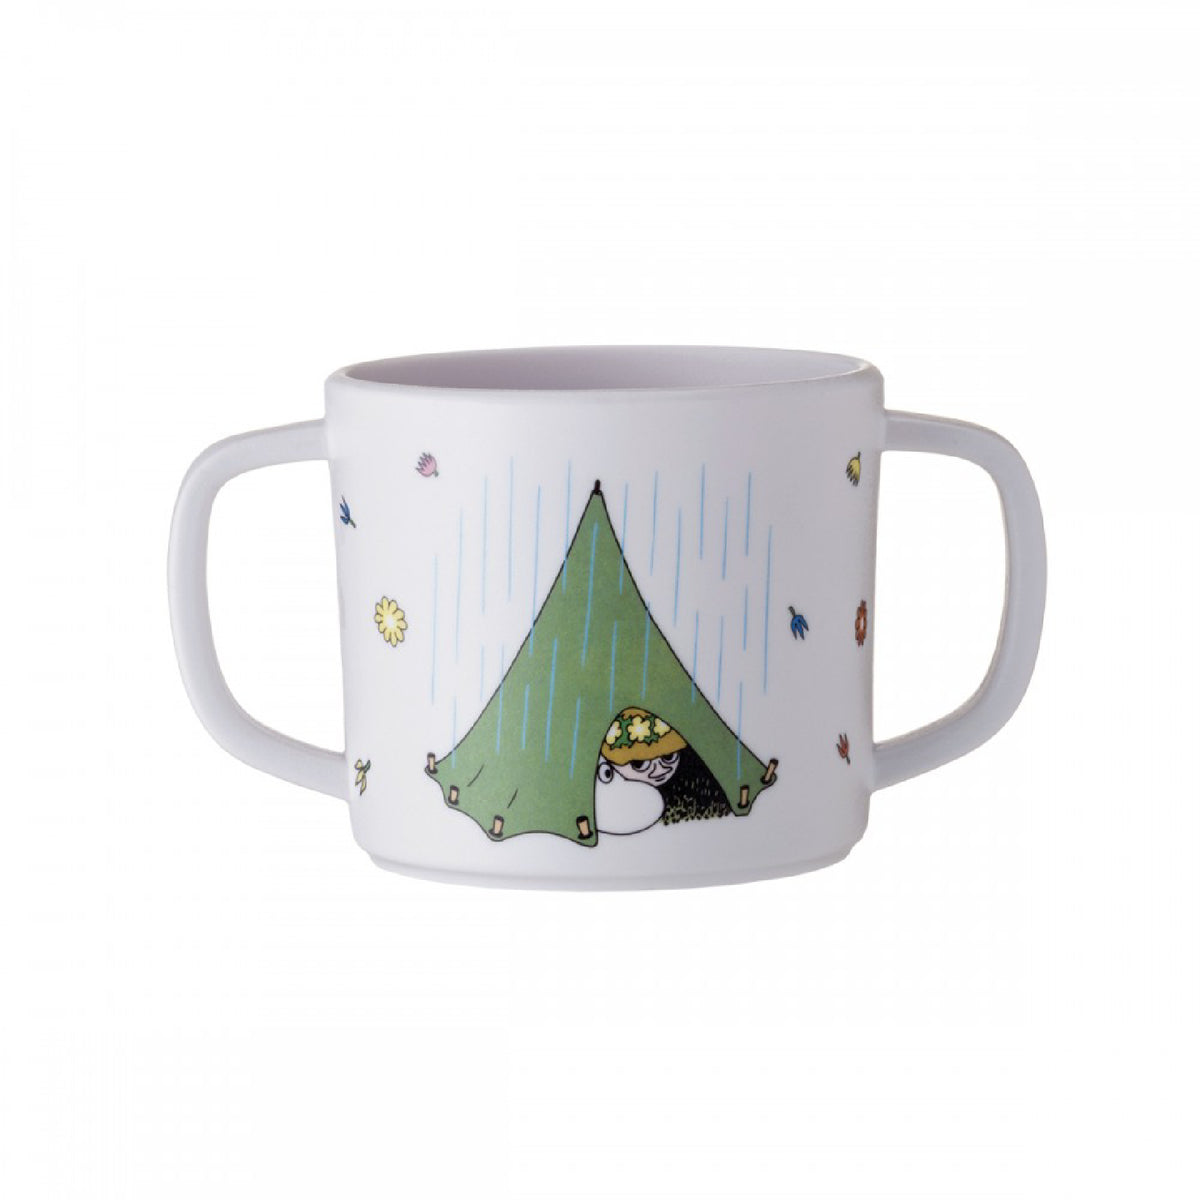 Double Handled Cup With Lid Camping